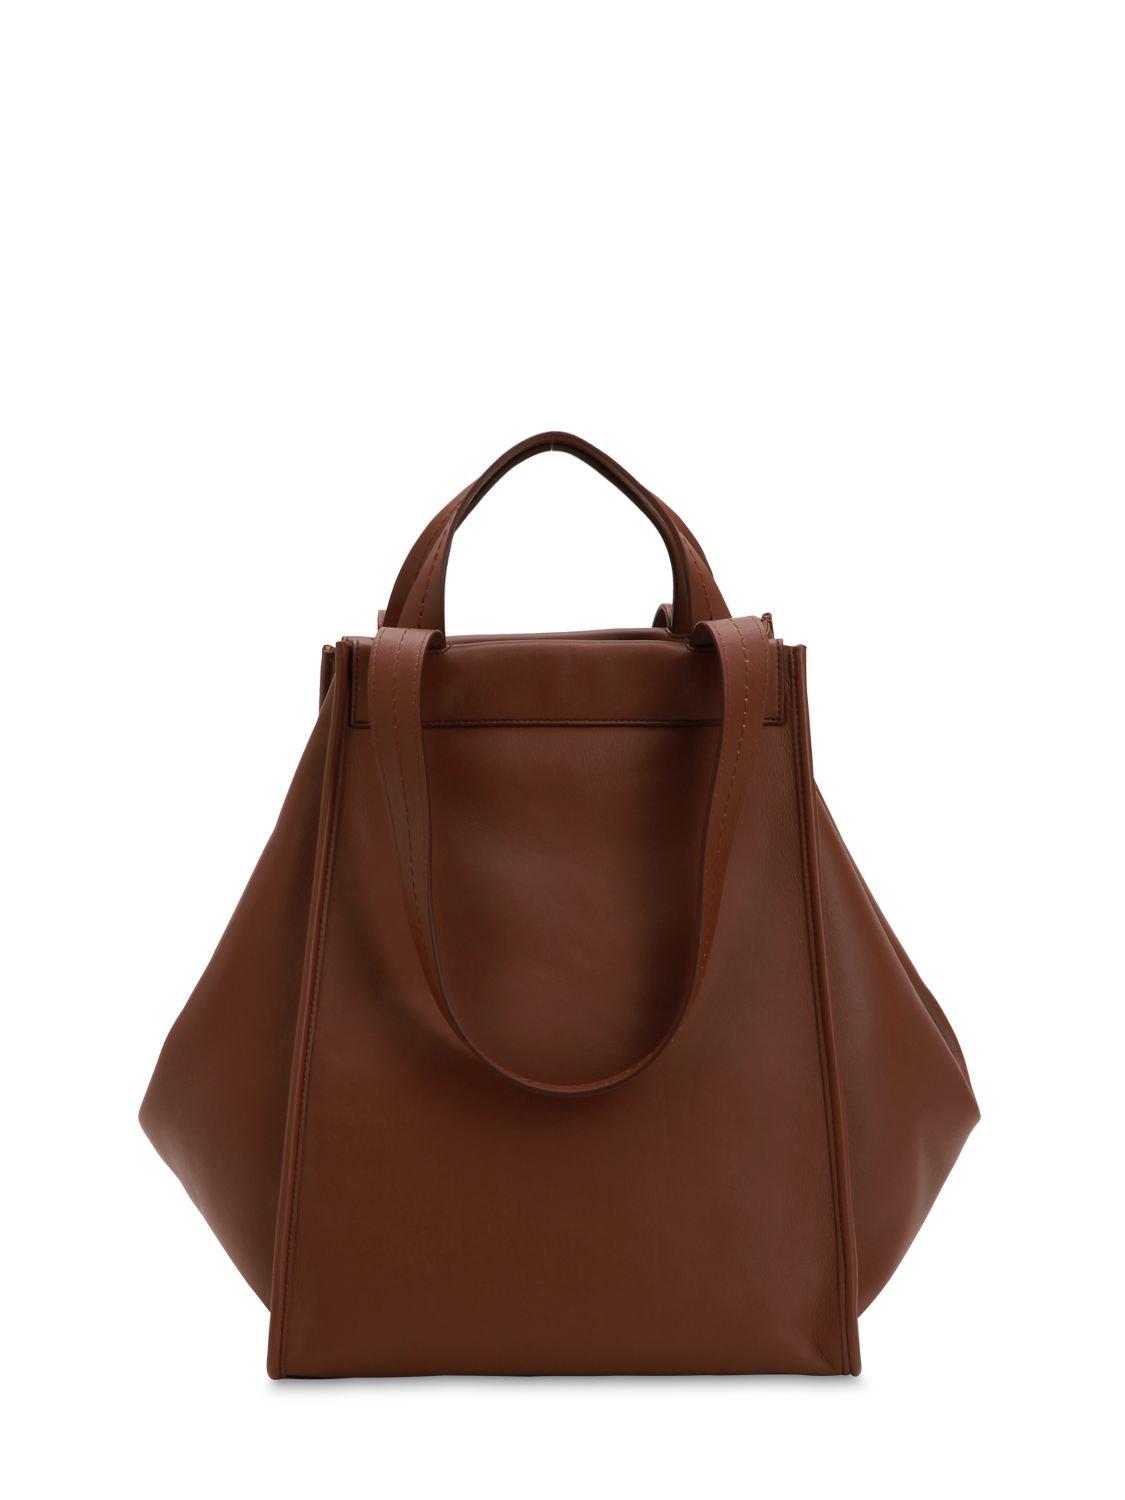 Max Mara Large Reversible Cashmere & Leather Bag in Brown | Lyst